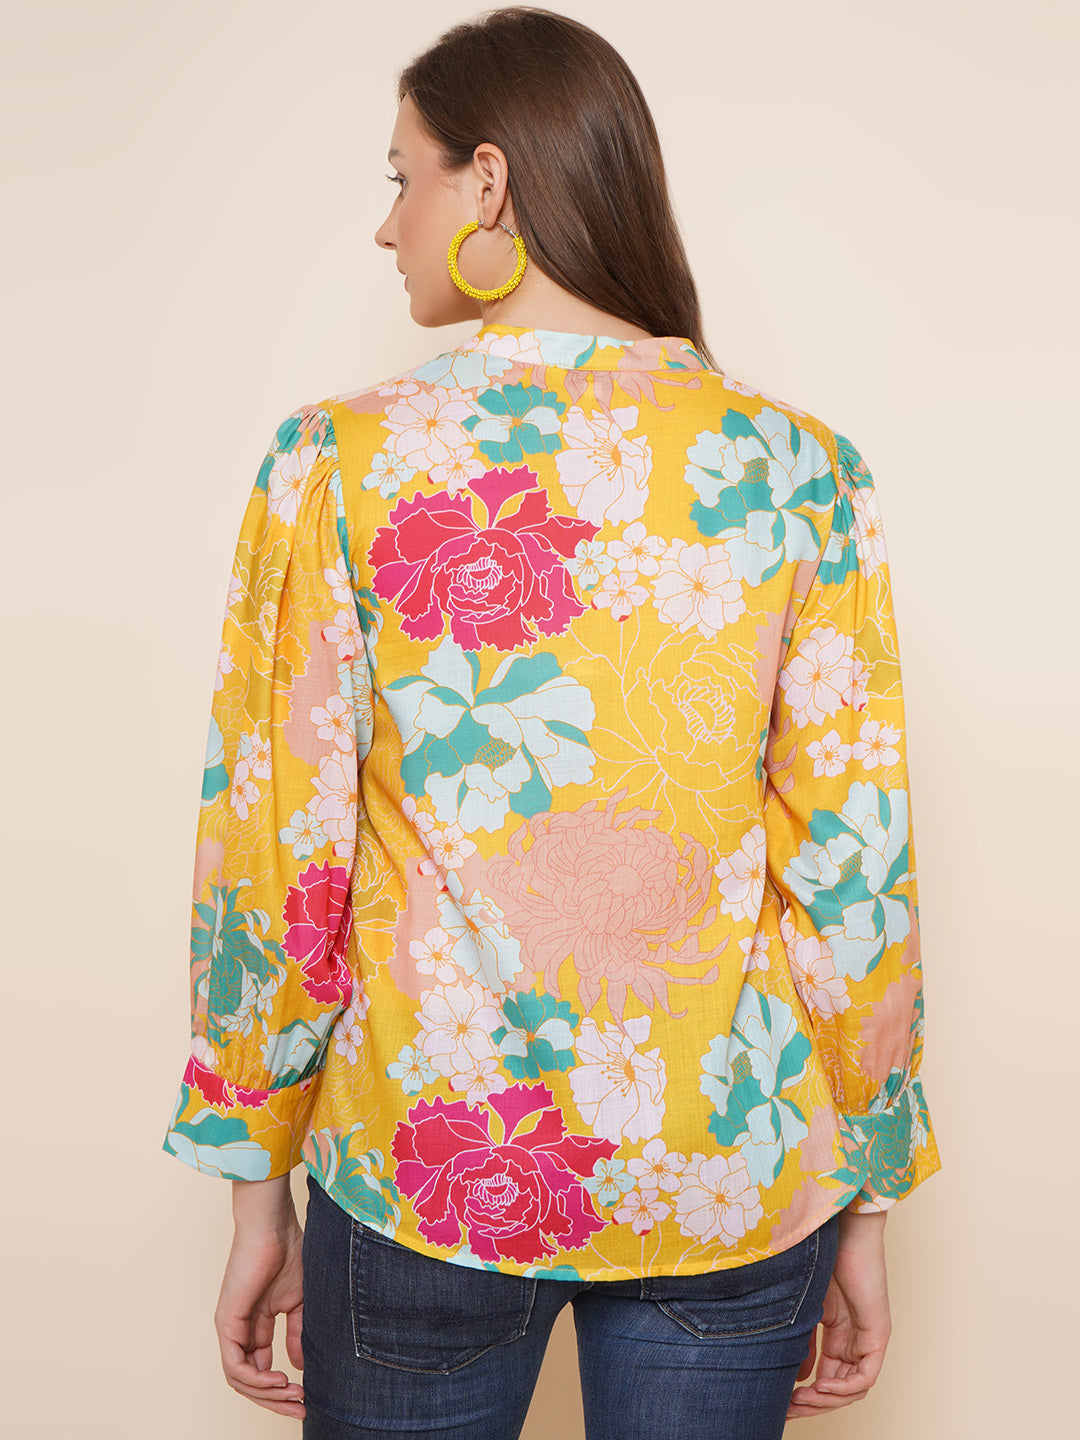 Bhama Couture Yellow Floral Printed Top